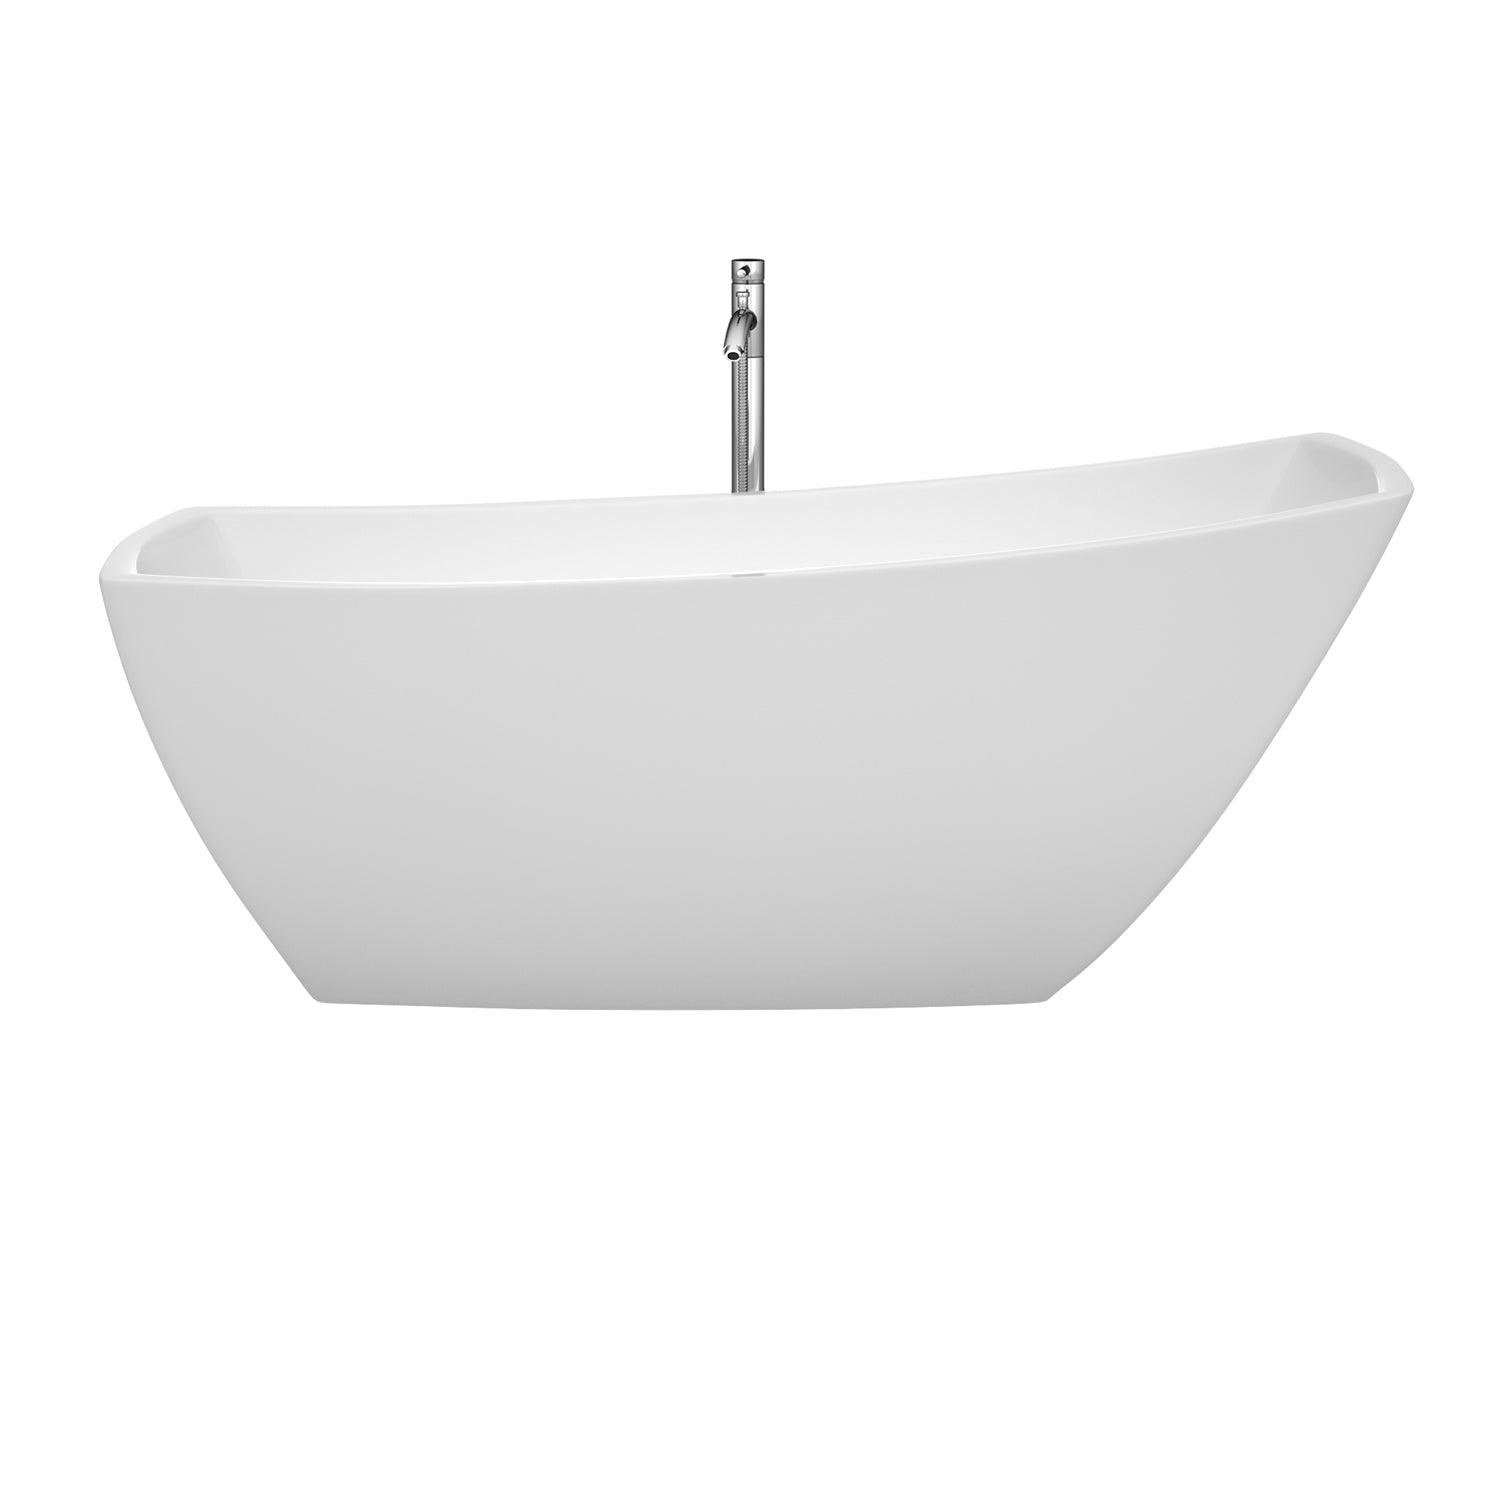 Wyndham Collection Antigua 67 Inch Freestanding Bathtub in White with Polished Chrome Drain and Overflow Trim - Sea & Stone Bath